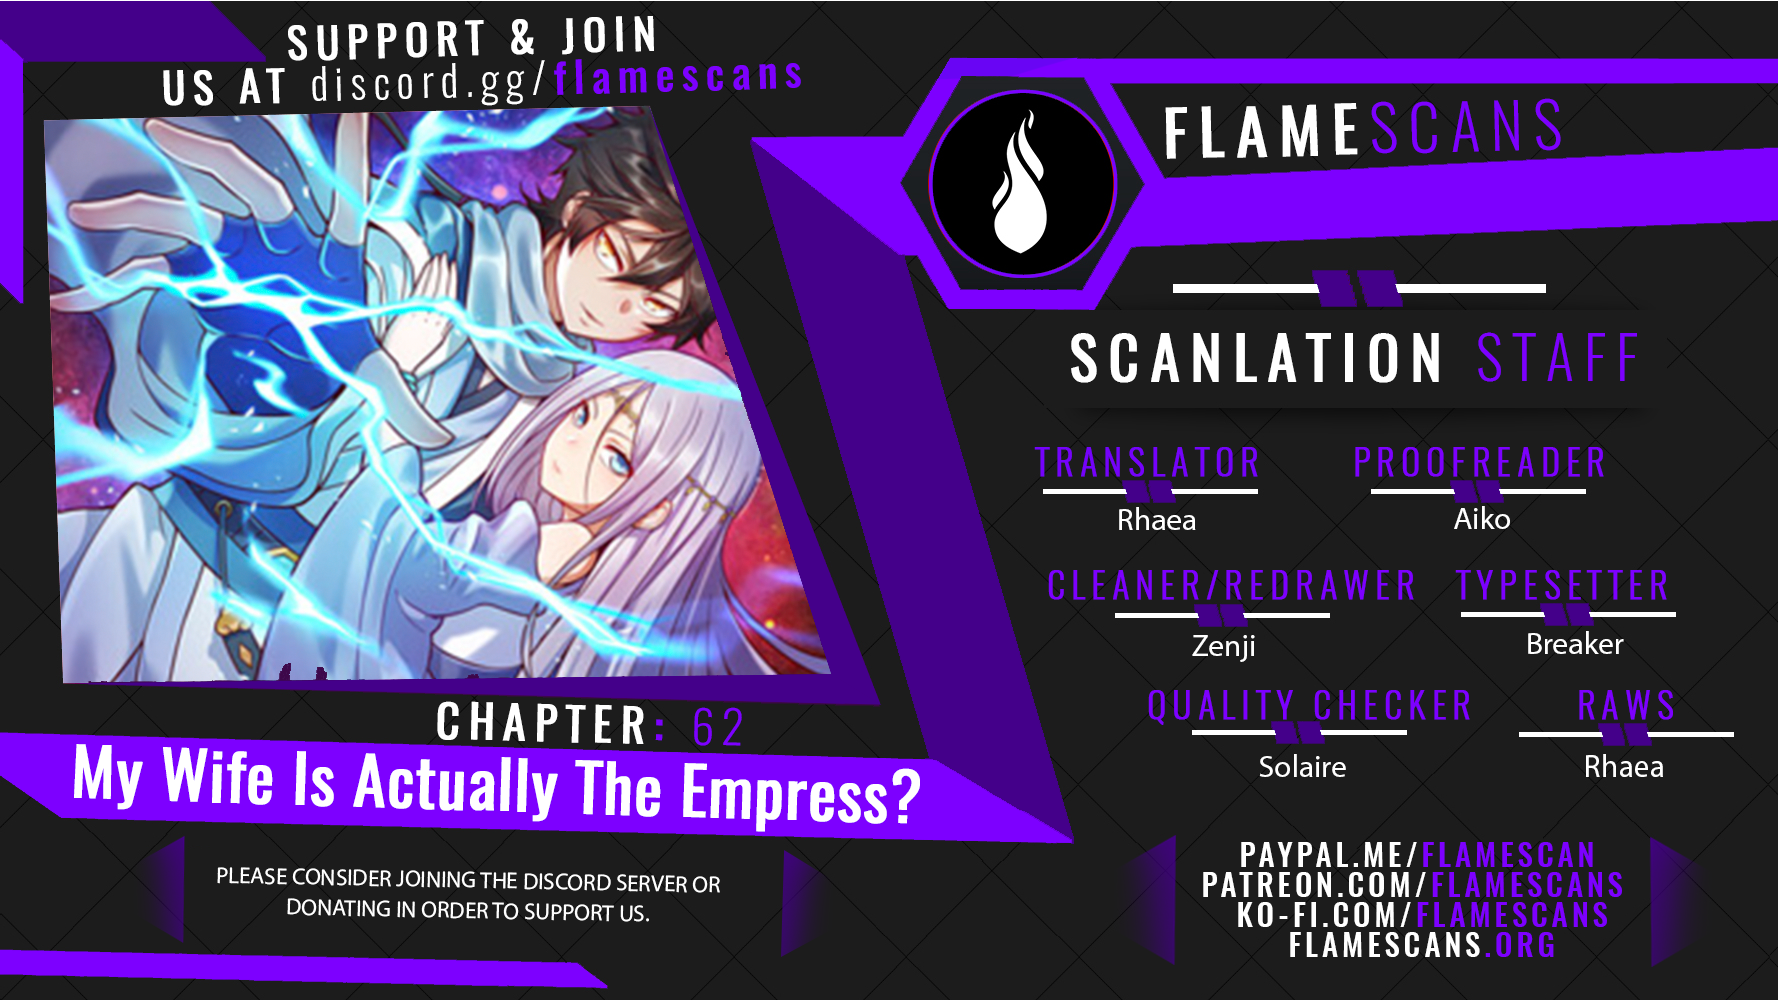 My Wife Is Actually The Empress? - Chapter 14172 - Image 1